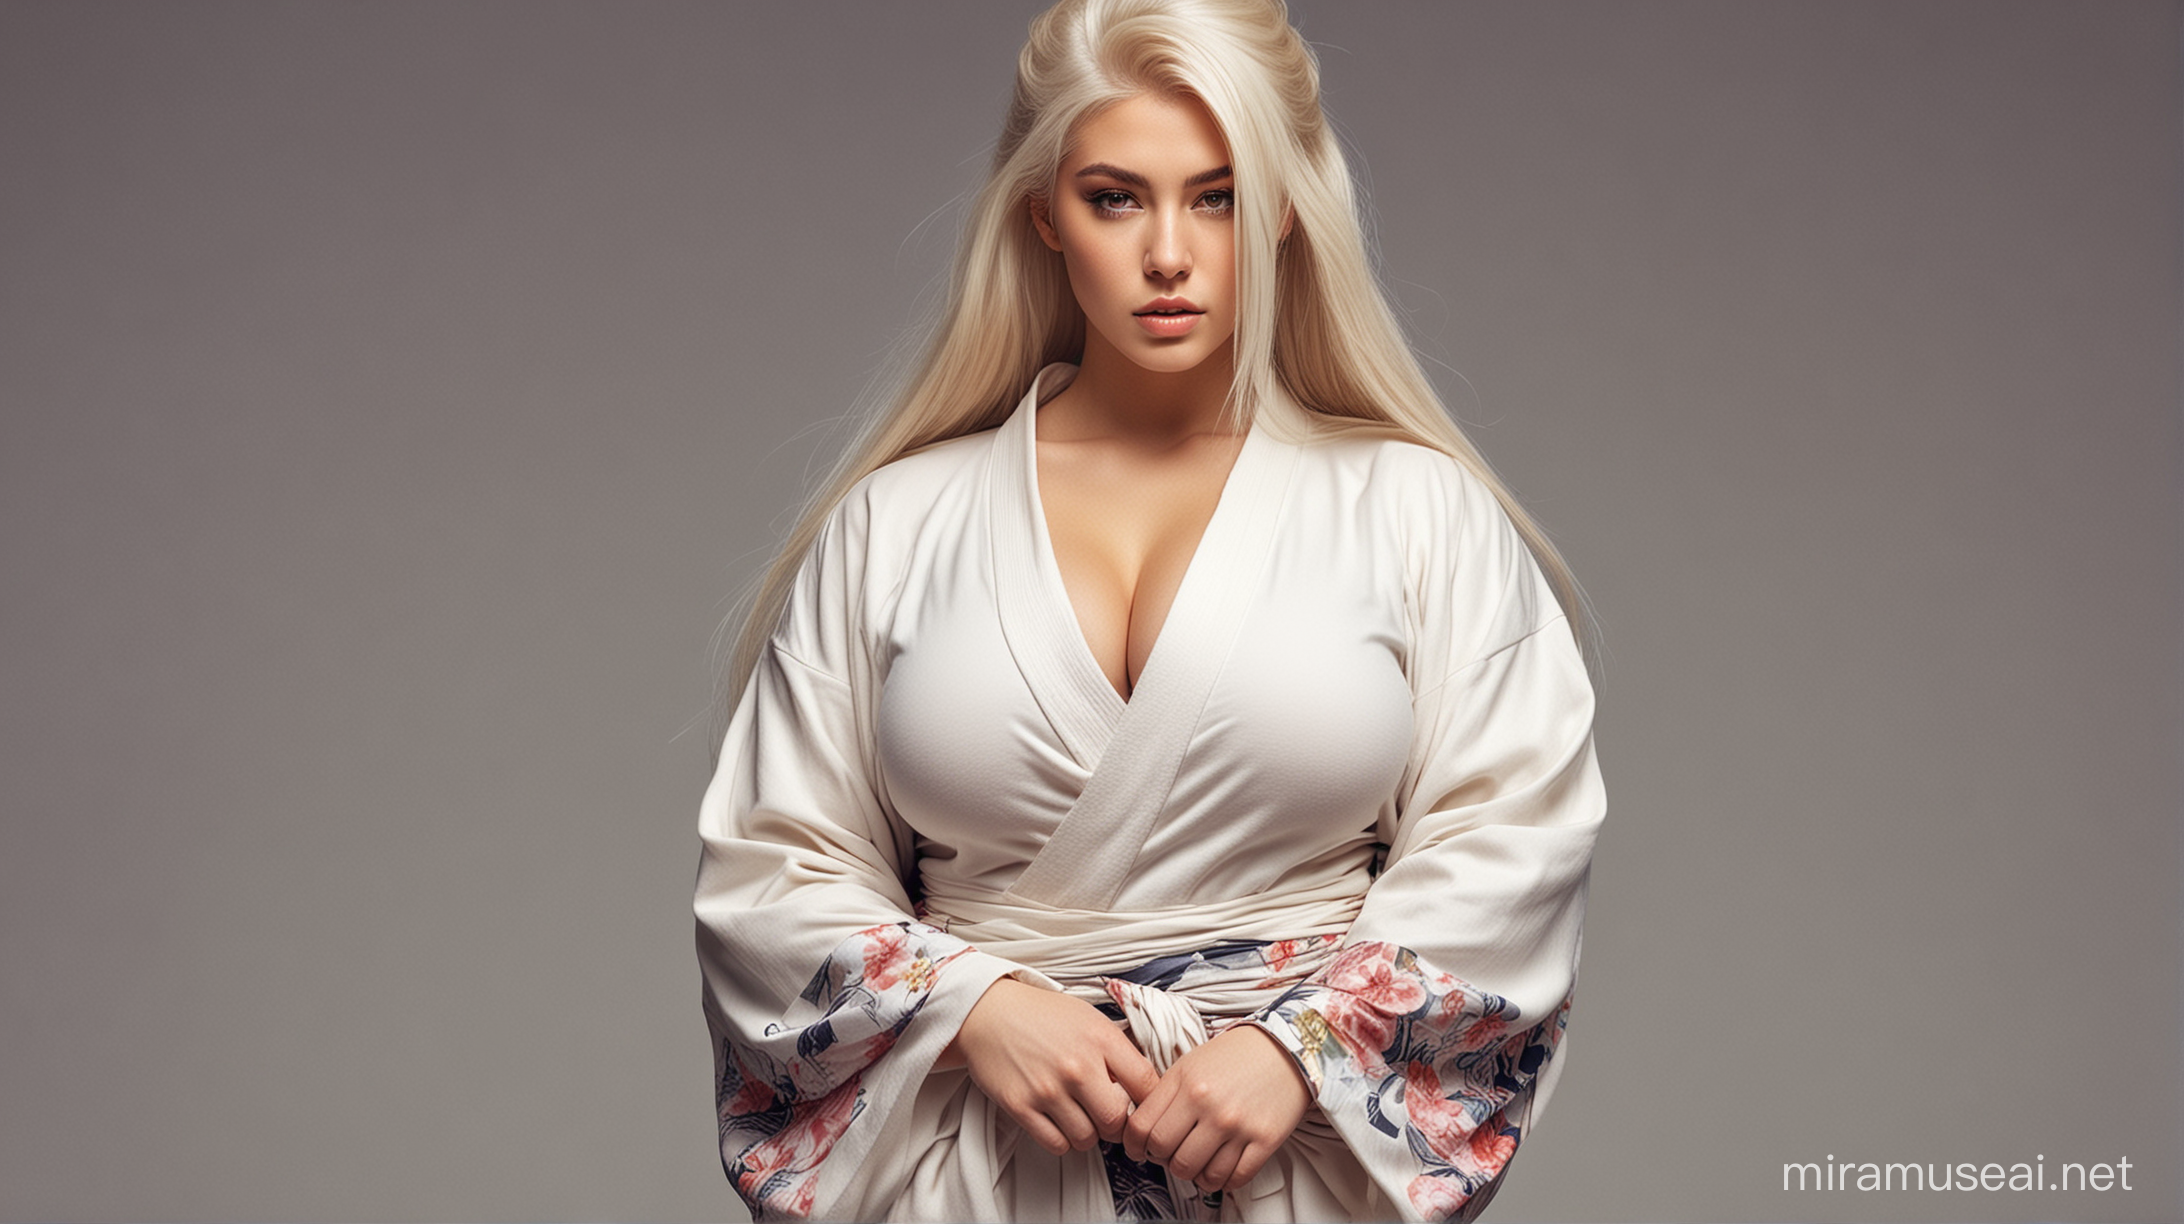 Extremely gigantic woman; extremely colossal; extremely muscular; beautiful; sexy; seductive; cute; milky hair; very big breasts; very big cleavage; very long hair; high fade undercut hairstyle; extremely muscular arms; wearing a milky sweatshirt with kimono sleeves; 